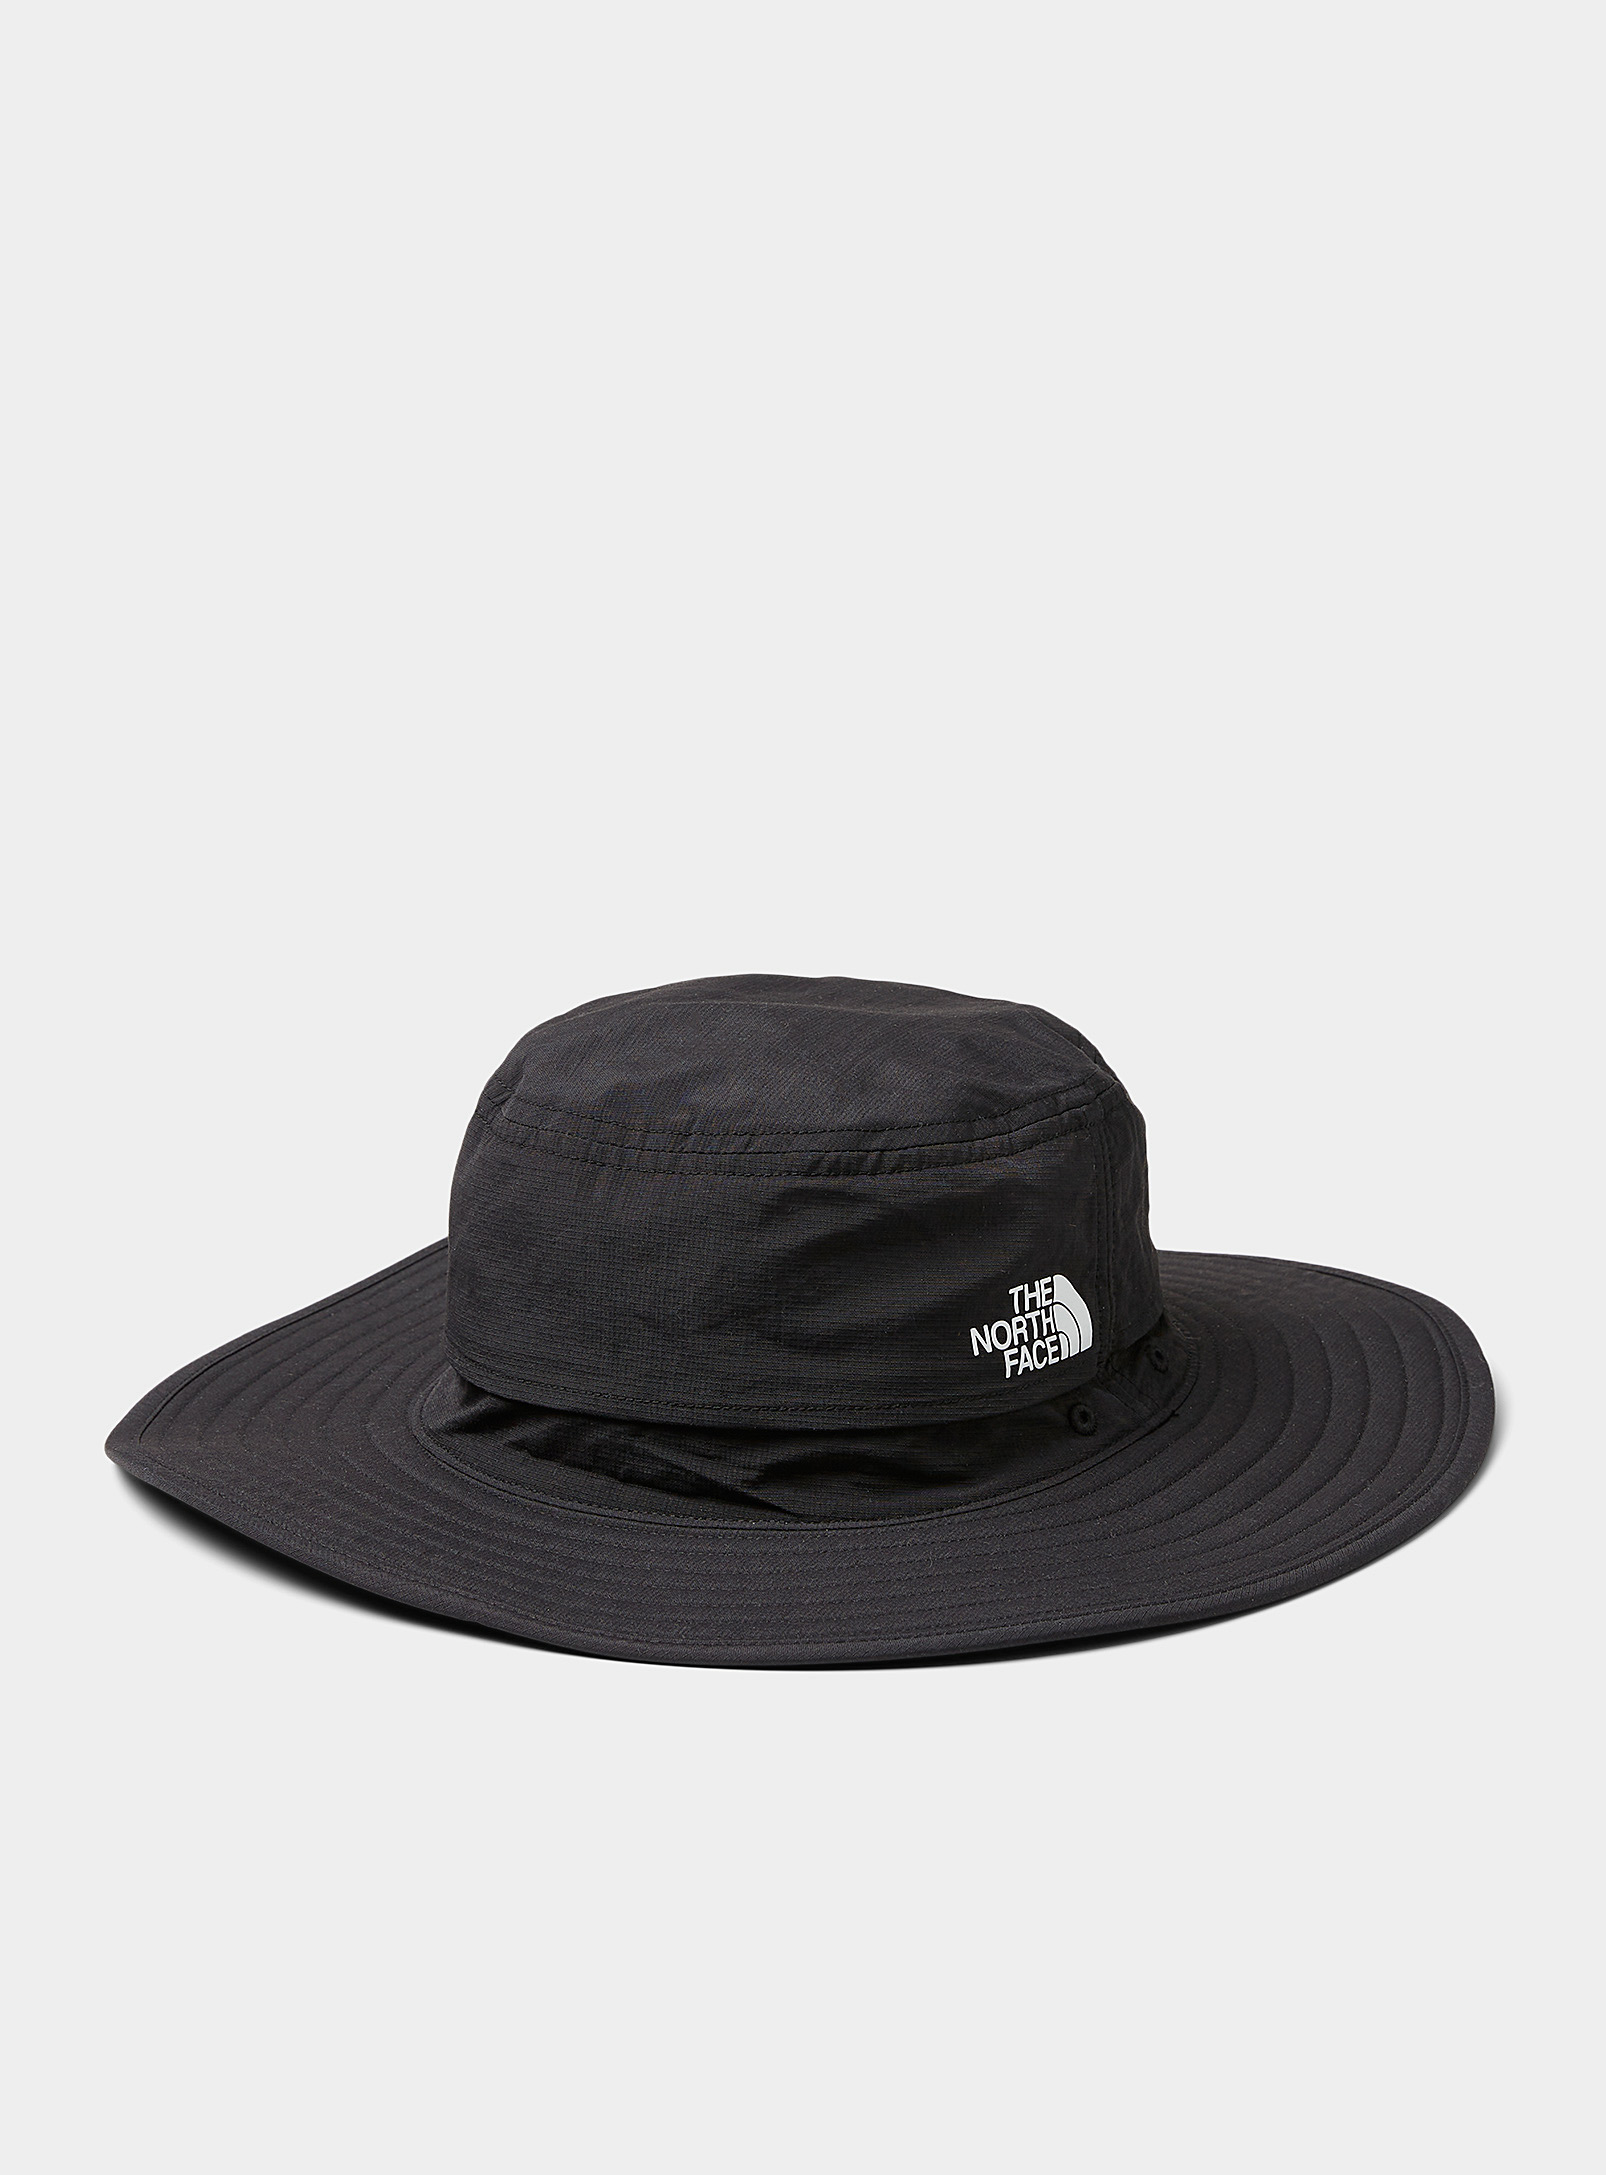 The North Face Utility Fisherman Hat In Black